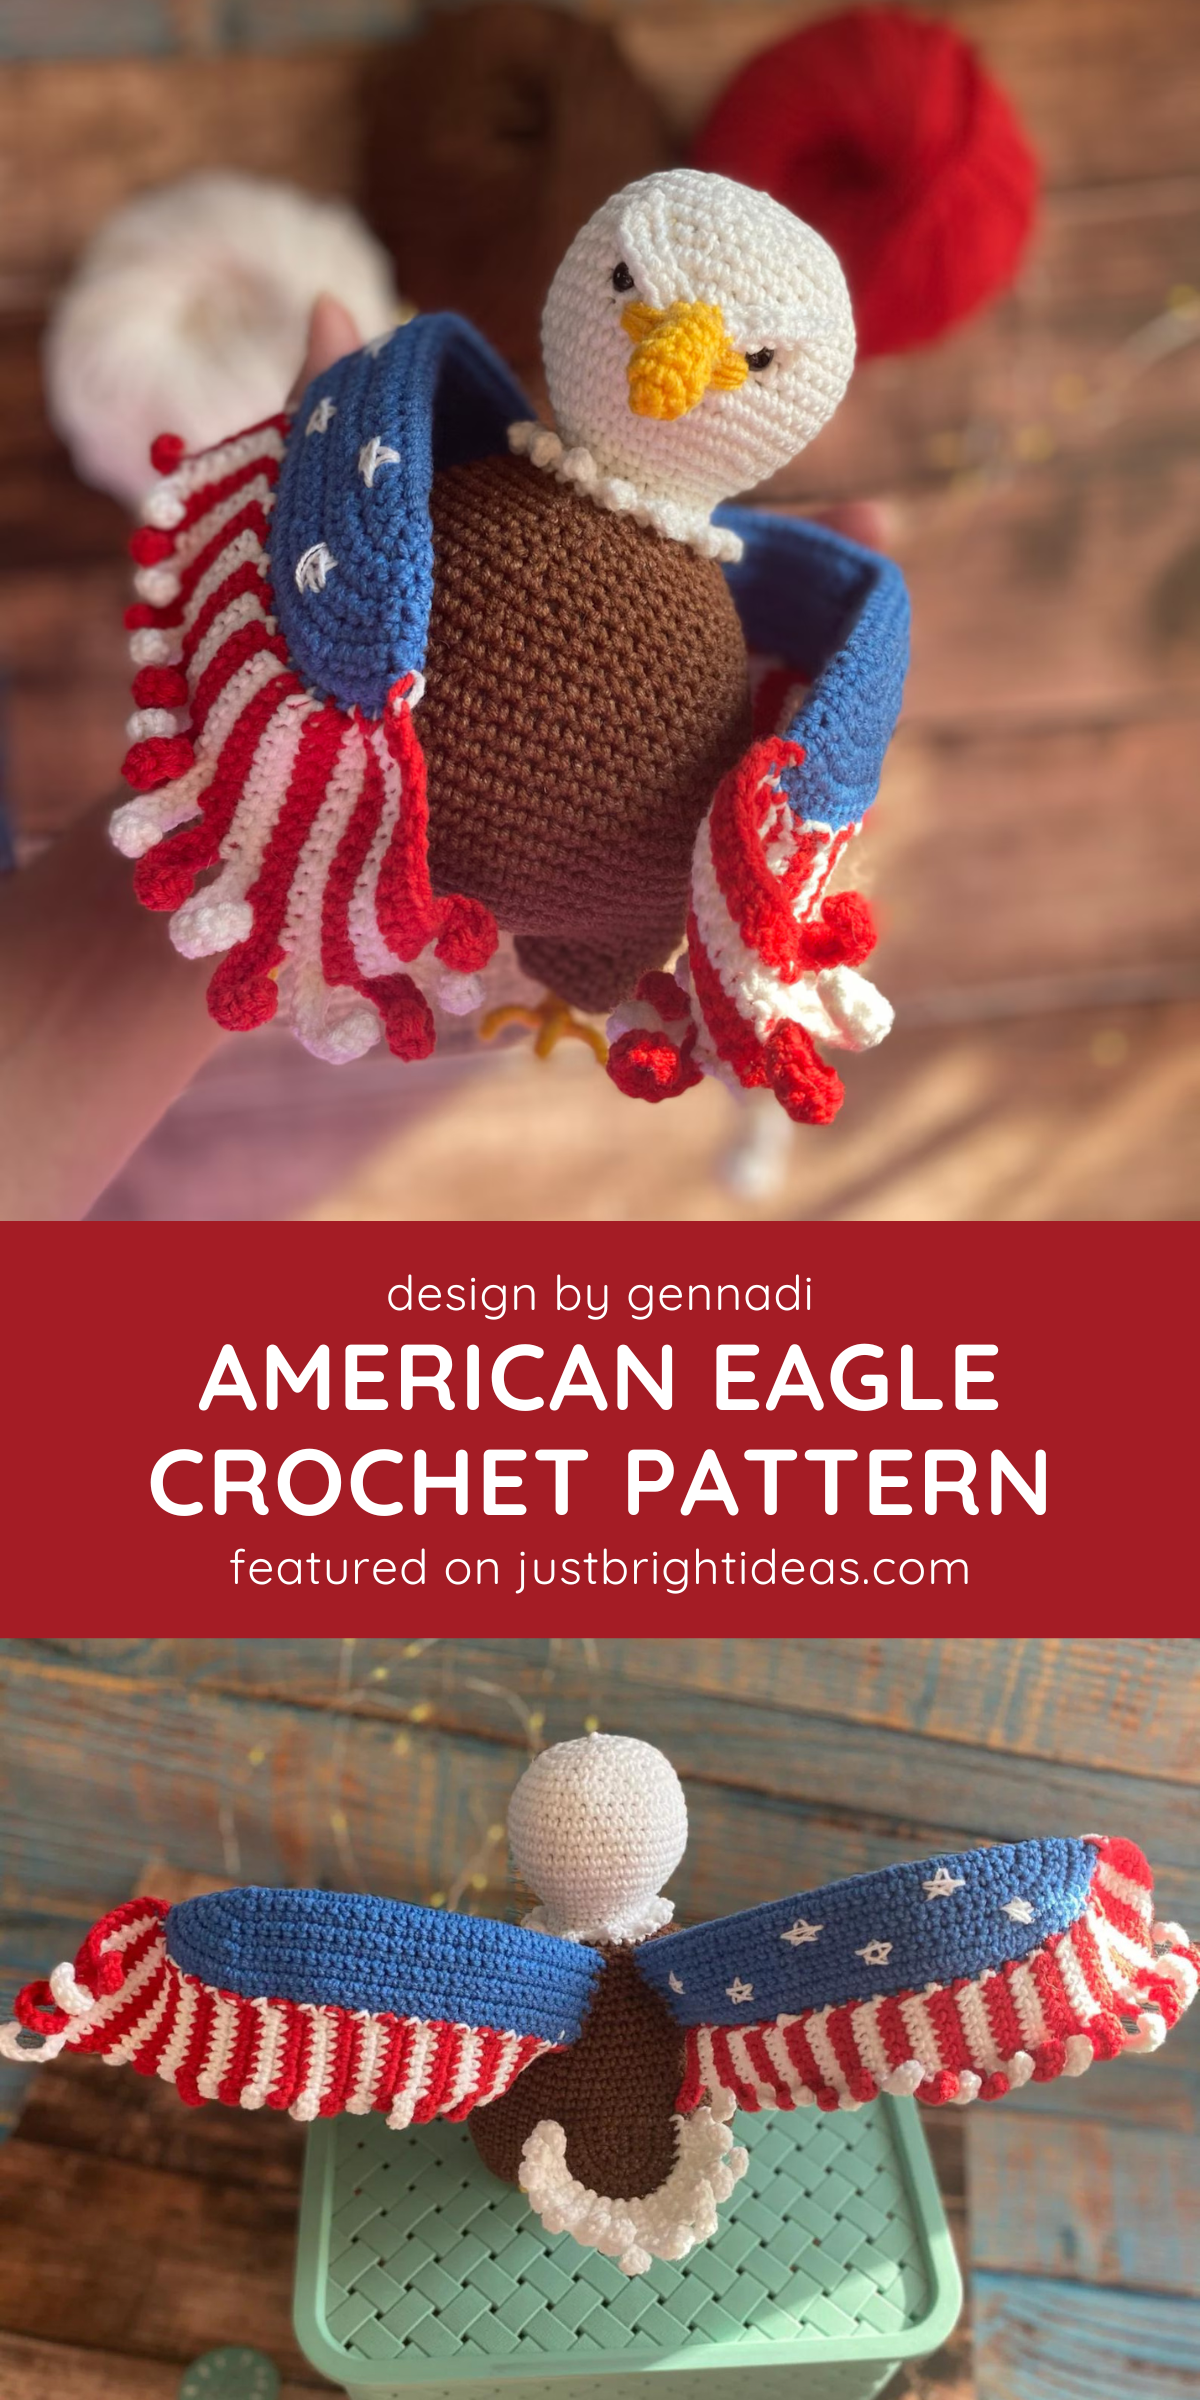 🦅🧵 "Show off your patriotic pride with this majestic American eagle crochet pattern! A striking piece that symbolizes strength and freedom." 🇺🇸💪
🖱️ Click the link to get the pattern! 🔗